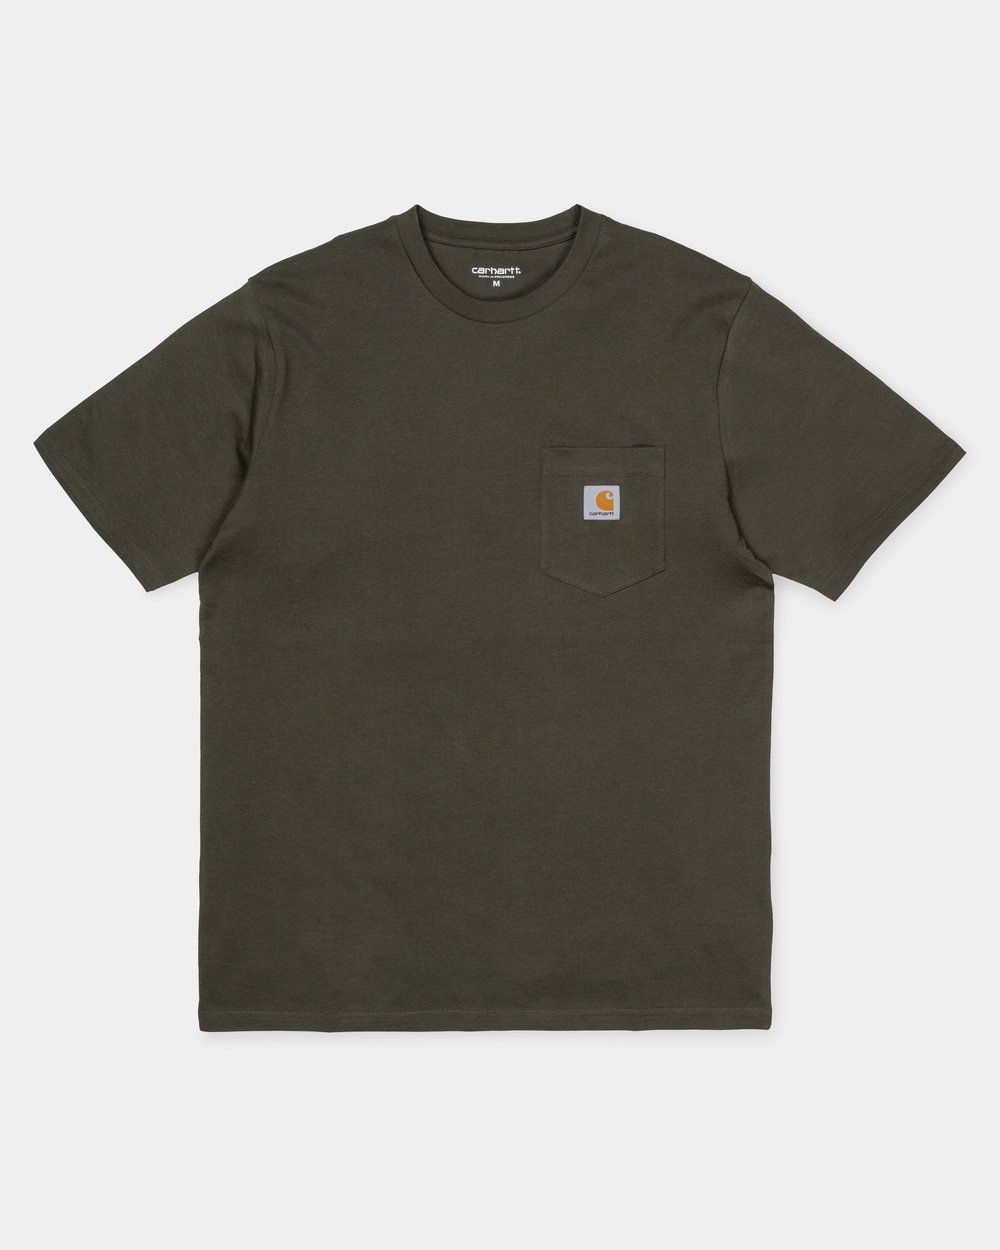 Product Image for Short Sleeve Pocket T-Shirt, Cypress